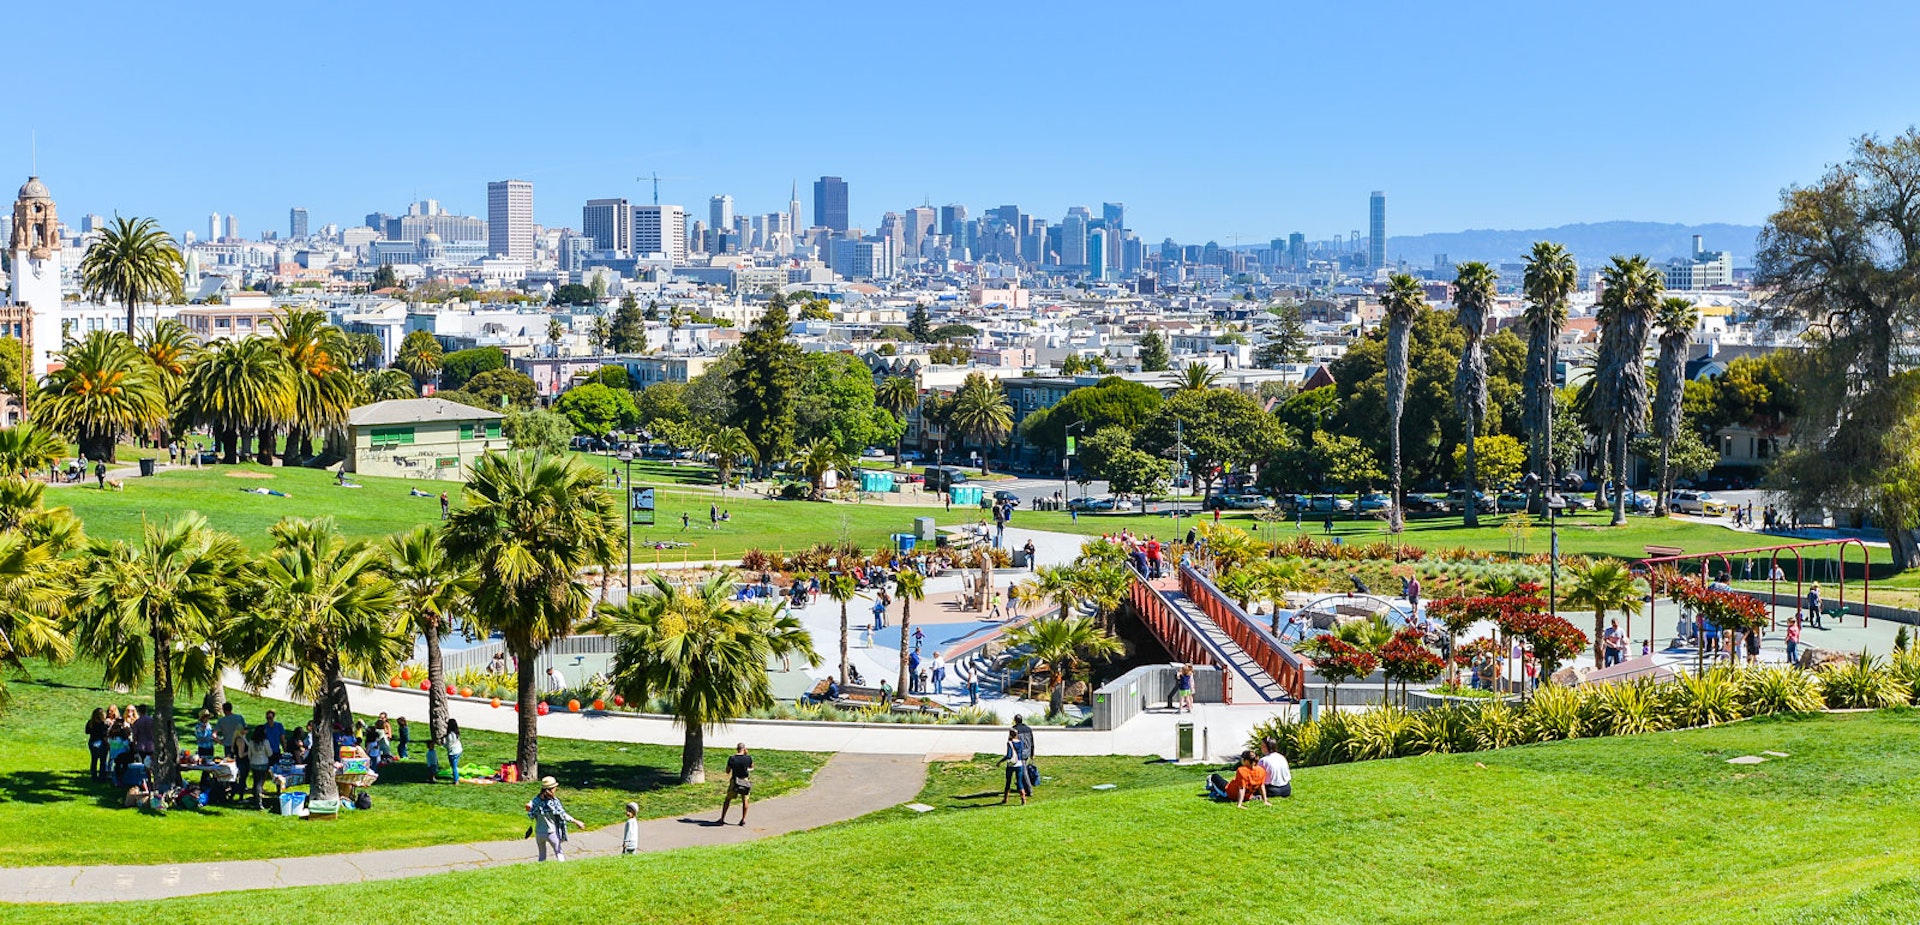 People play in a grassy park on a sunny day with the San Francisco skyline in the distance